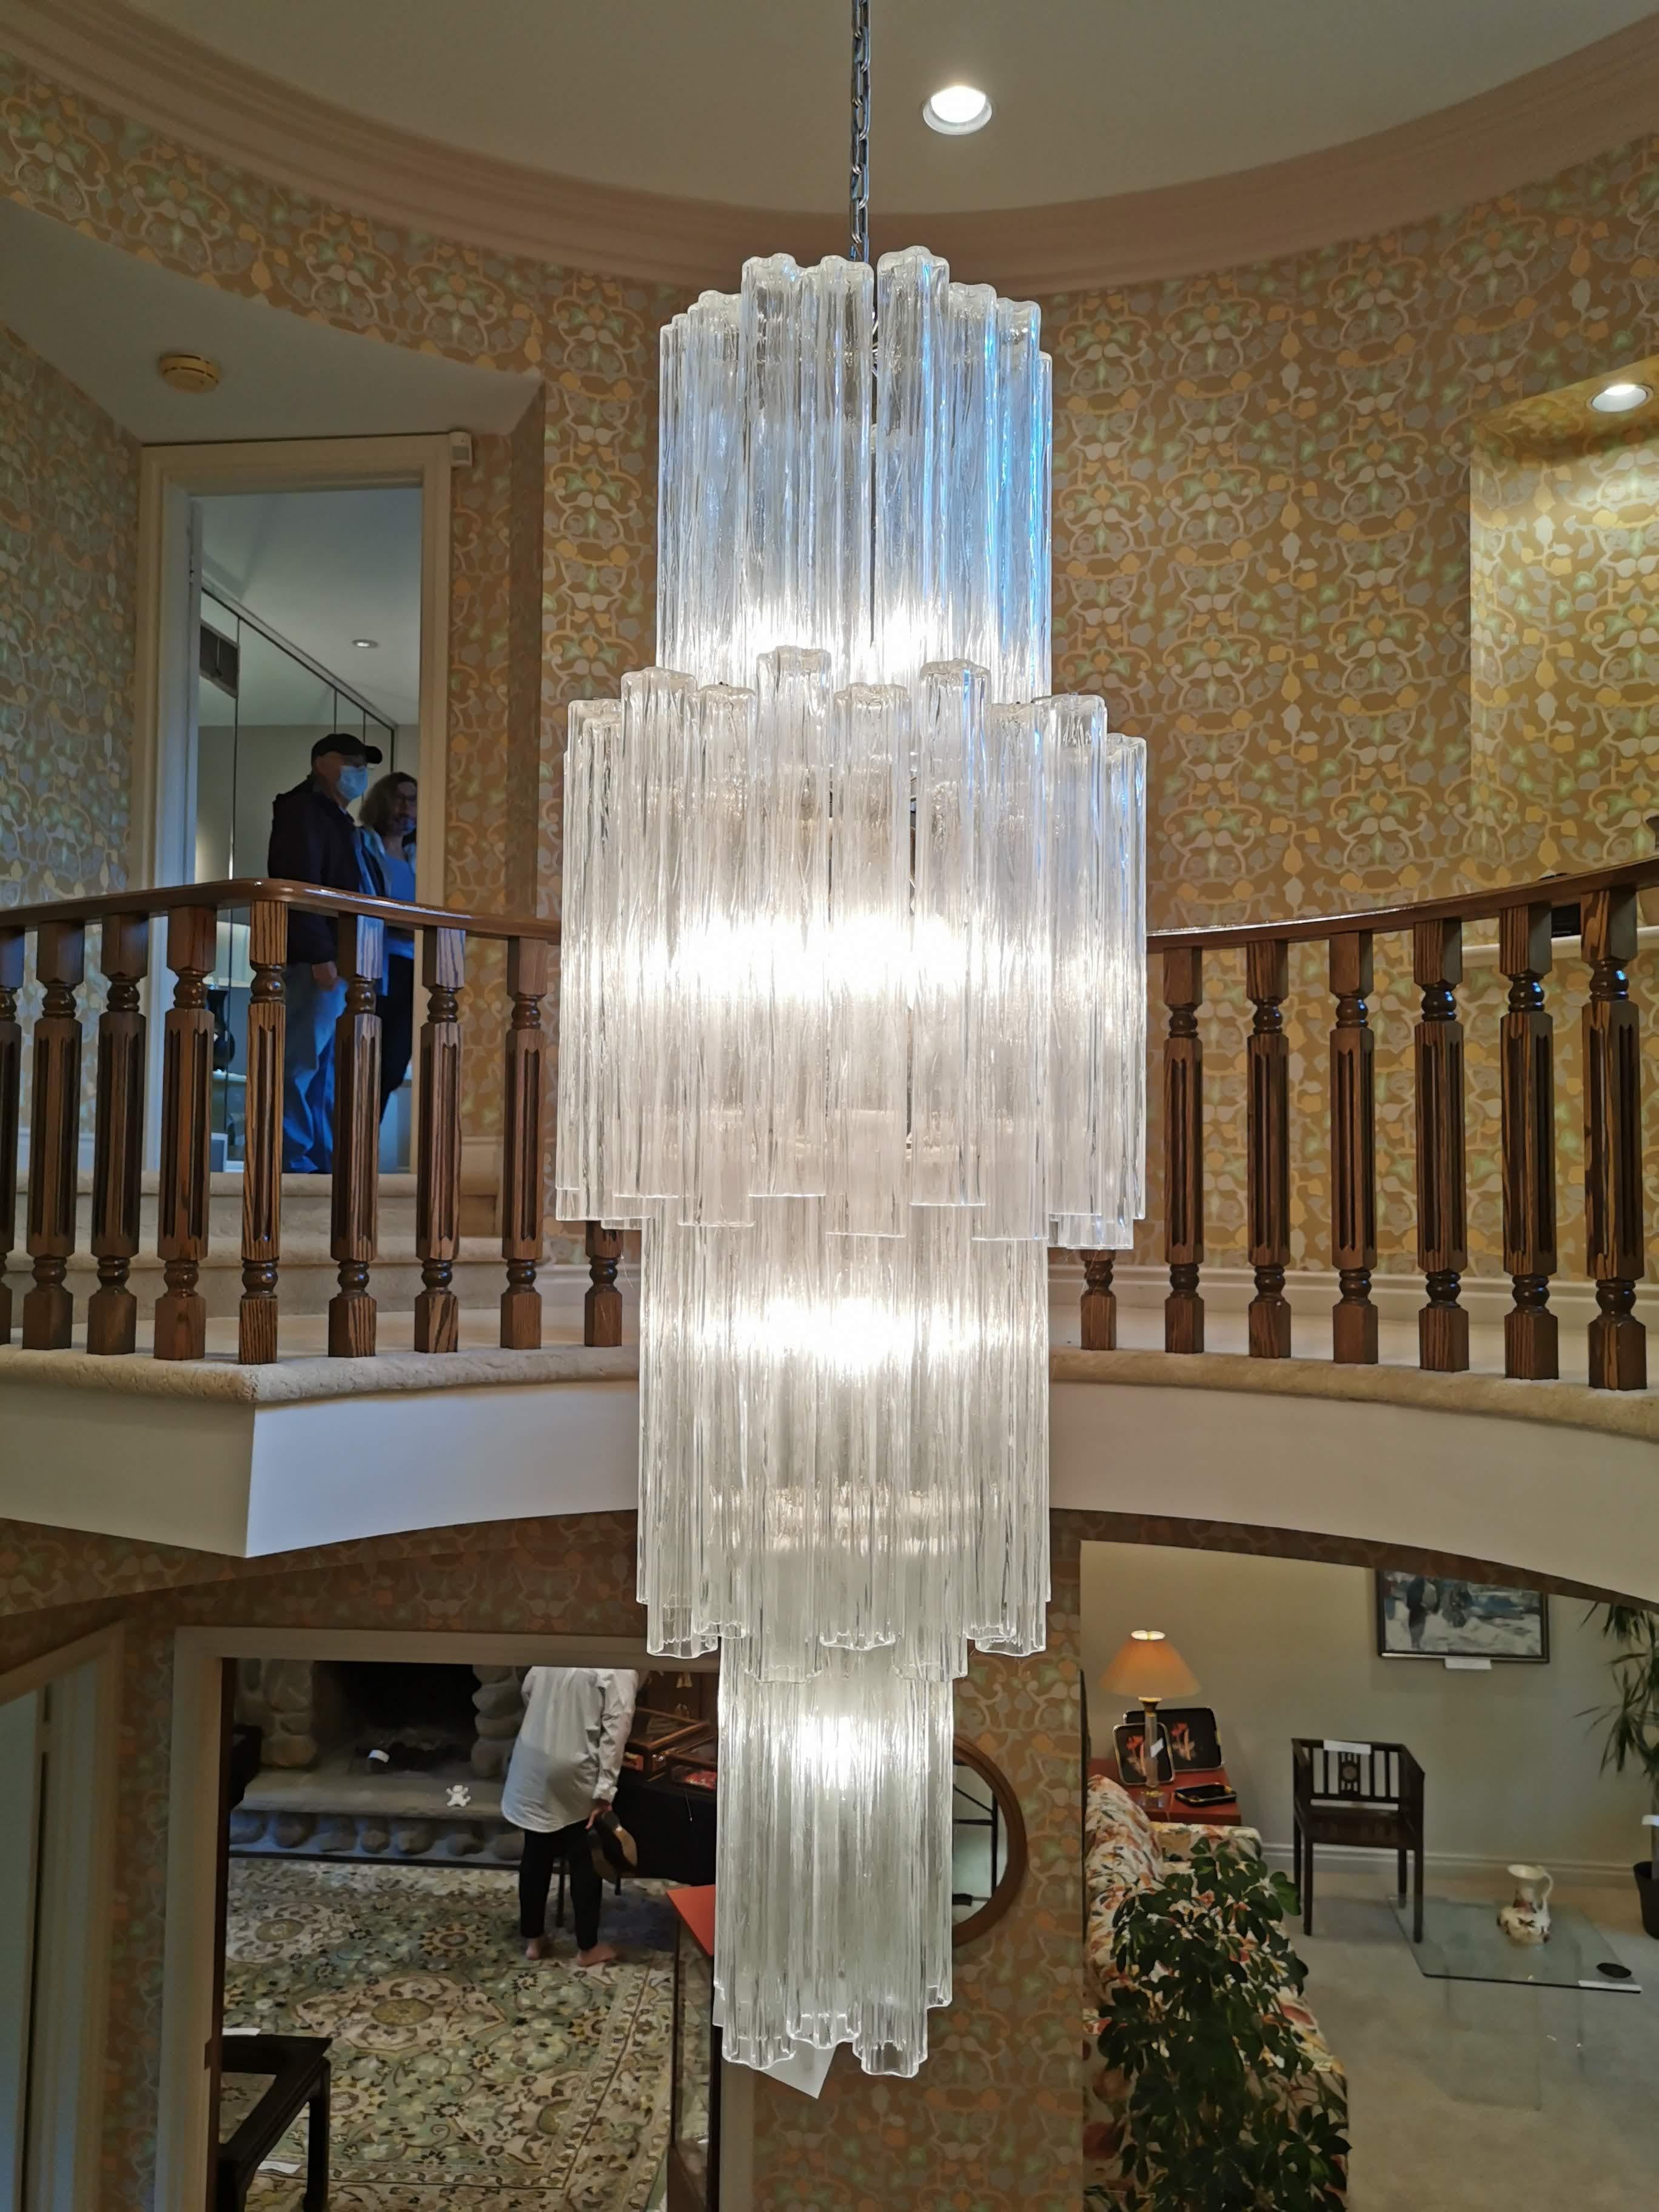 Original Venini ' Tronchi ' huge sculptural chandelier made of thick texturized clear glass pieces .

Each 64  glass shade measure 20 inches in lenght by a 1/4 inches thick . 

Chrome  steel frame .

Measure 72 inches high by 24 inches wide. 

Chain